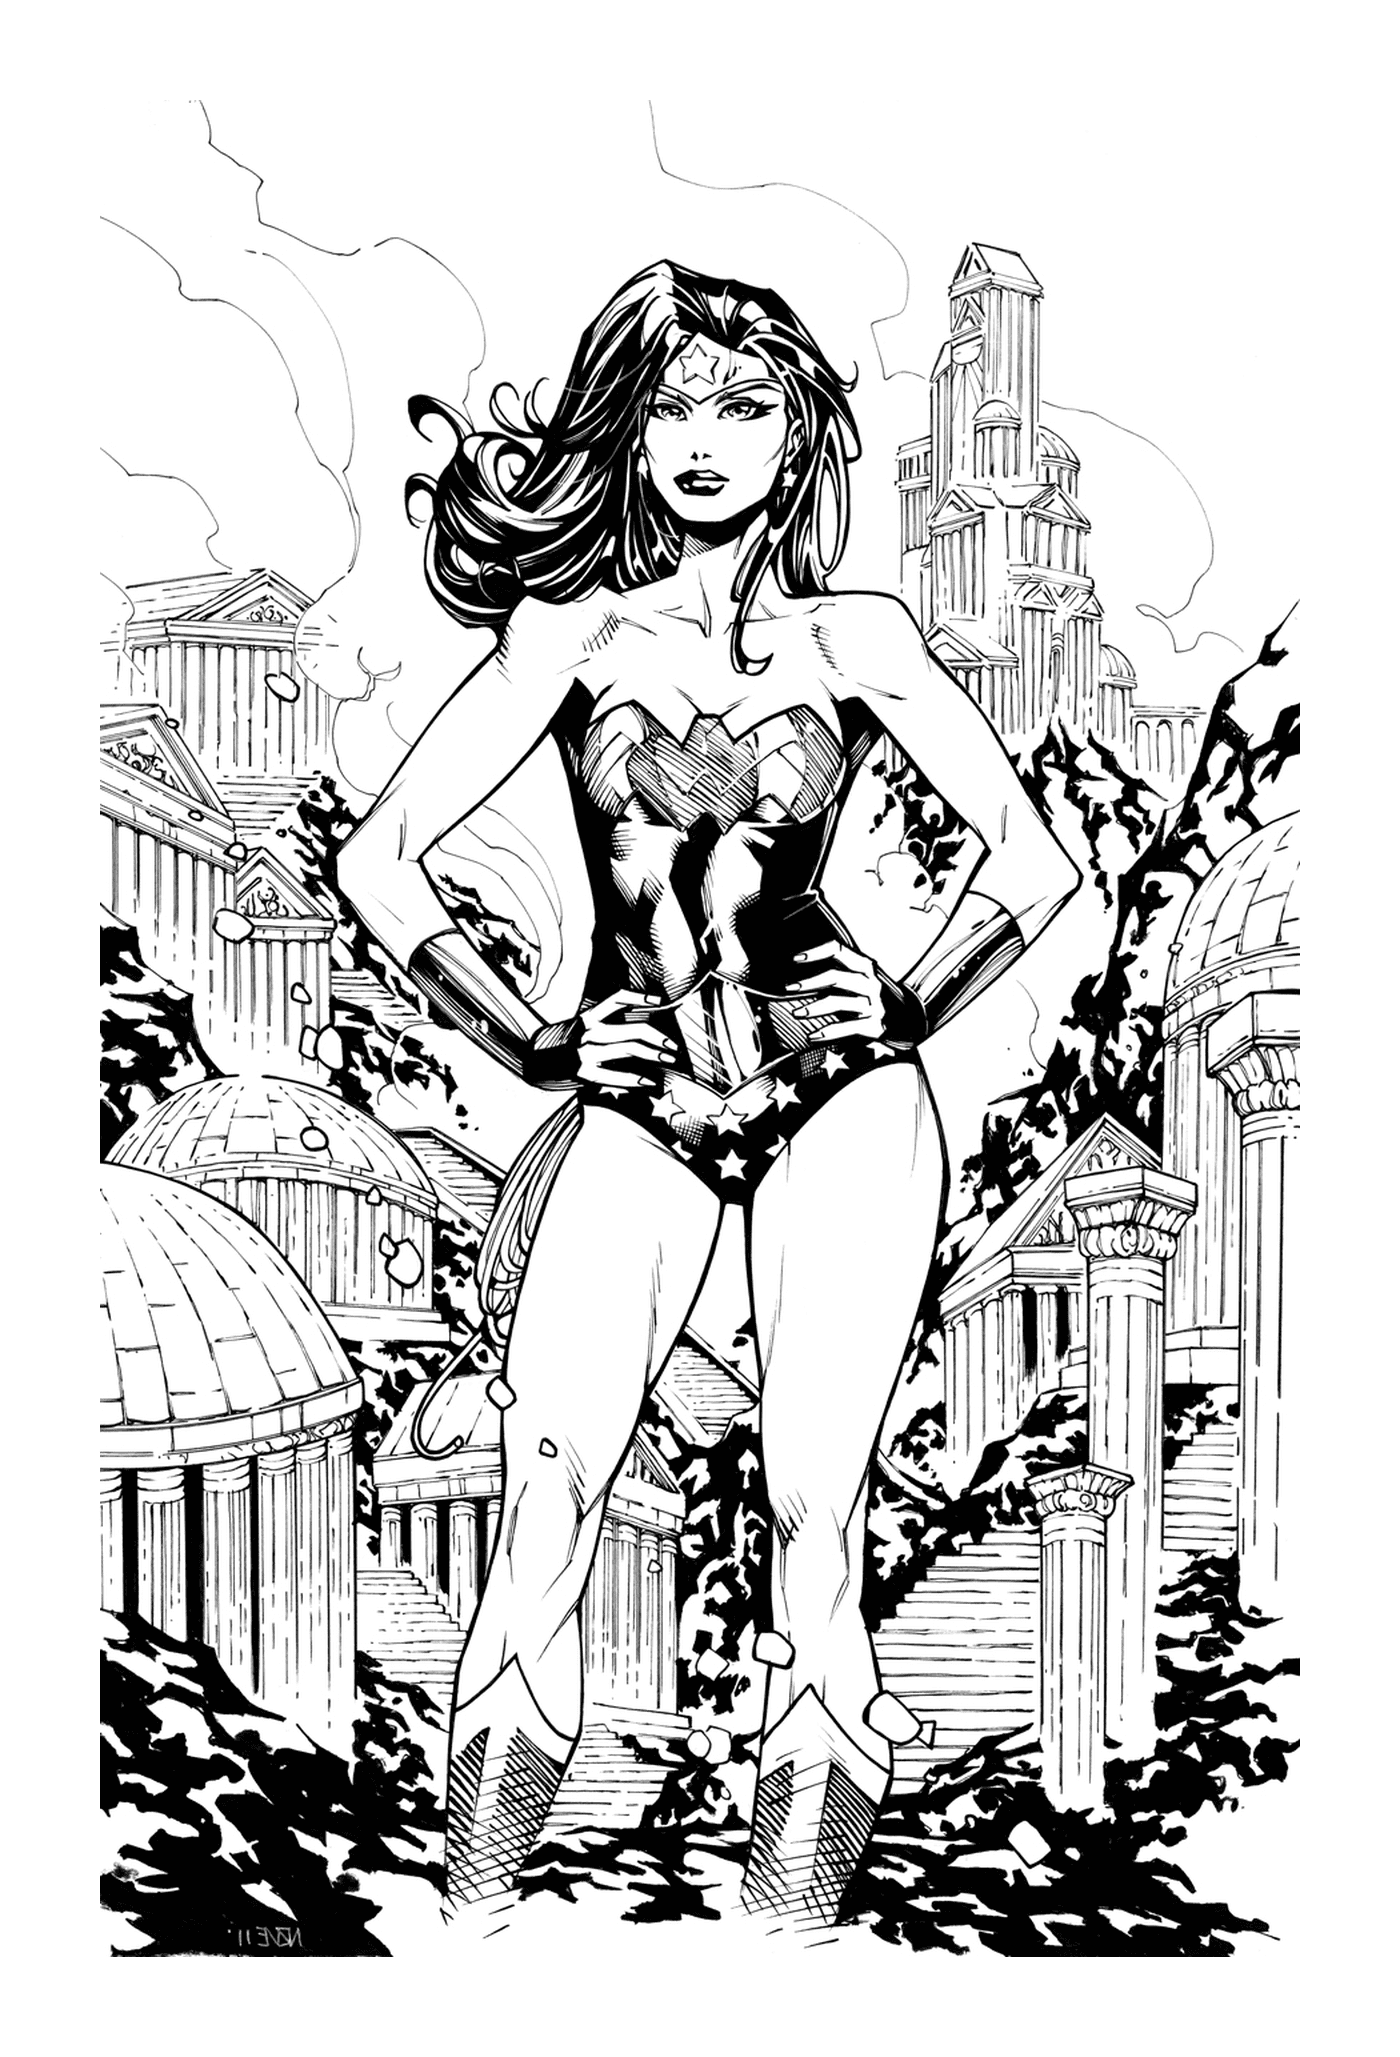  Wonder Woman in the city 